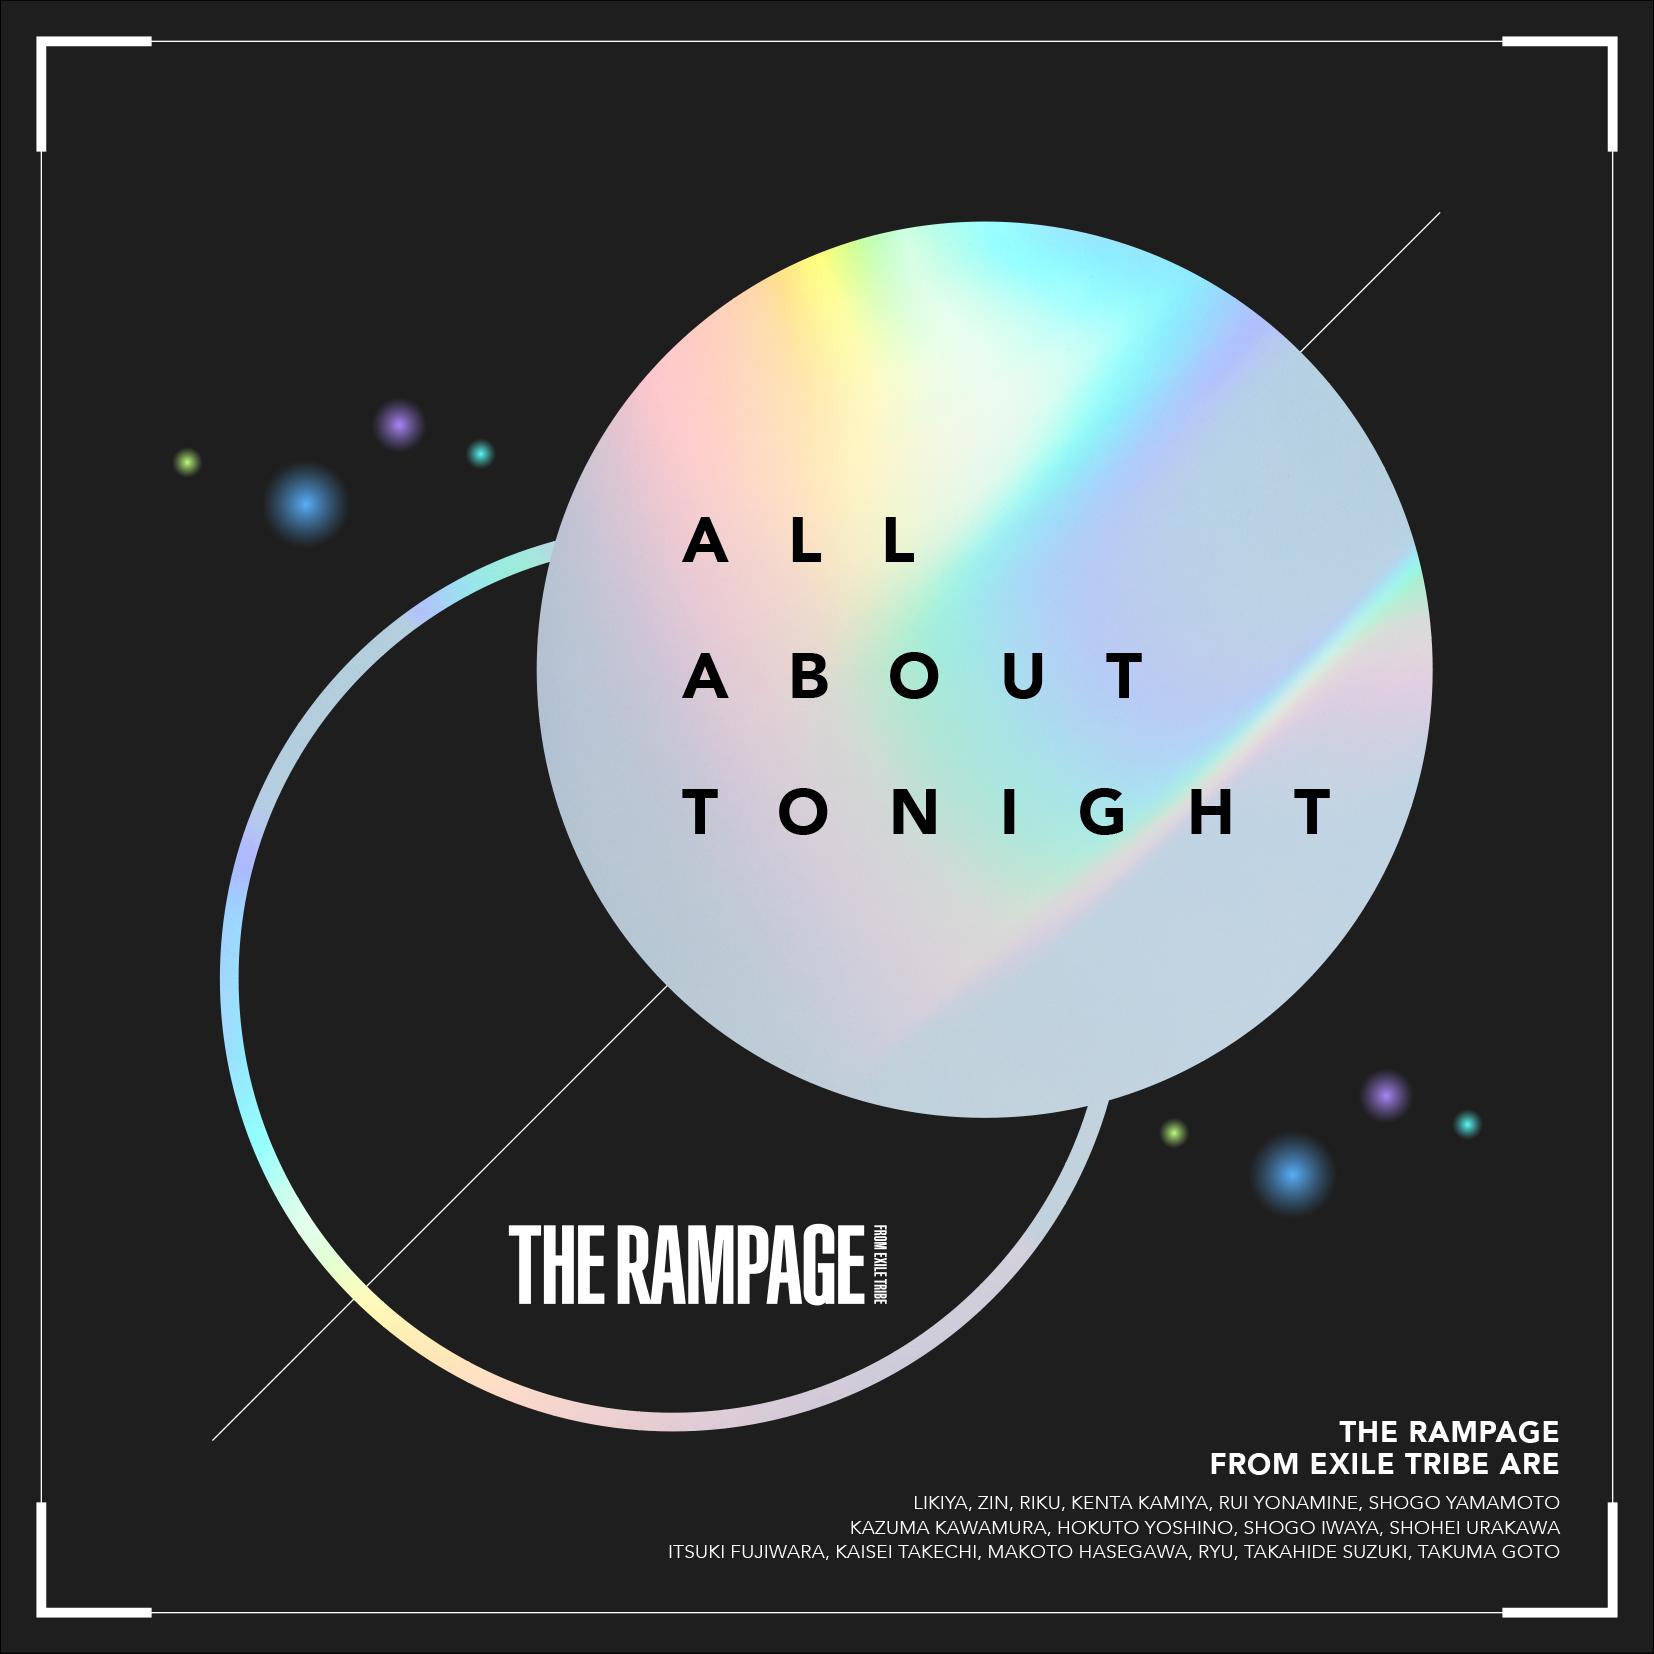 ALL ABOUT TONIGHT歌词 歌手THE RAMPAGE from EXILE TRIBE-专辑ALL ABOUT TONIGHT-单曲《ALL ABOUT TONIGHT》LRC歌词下载